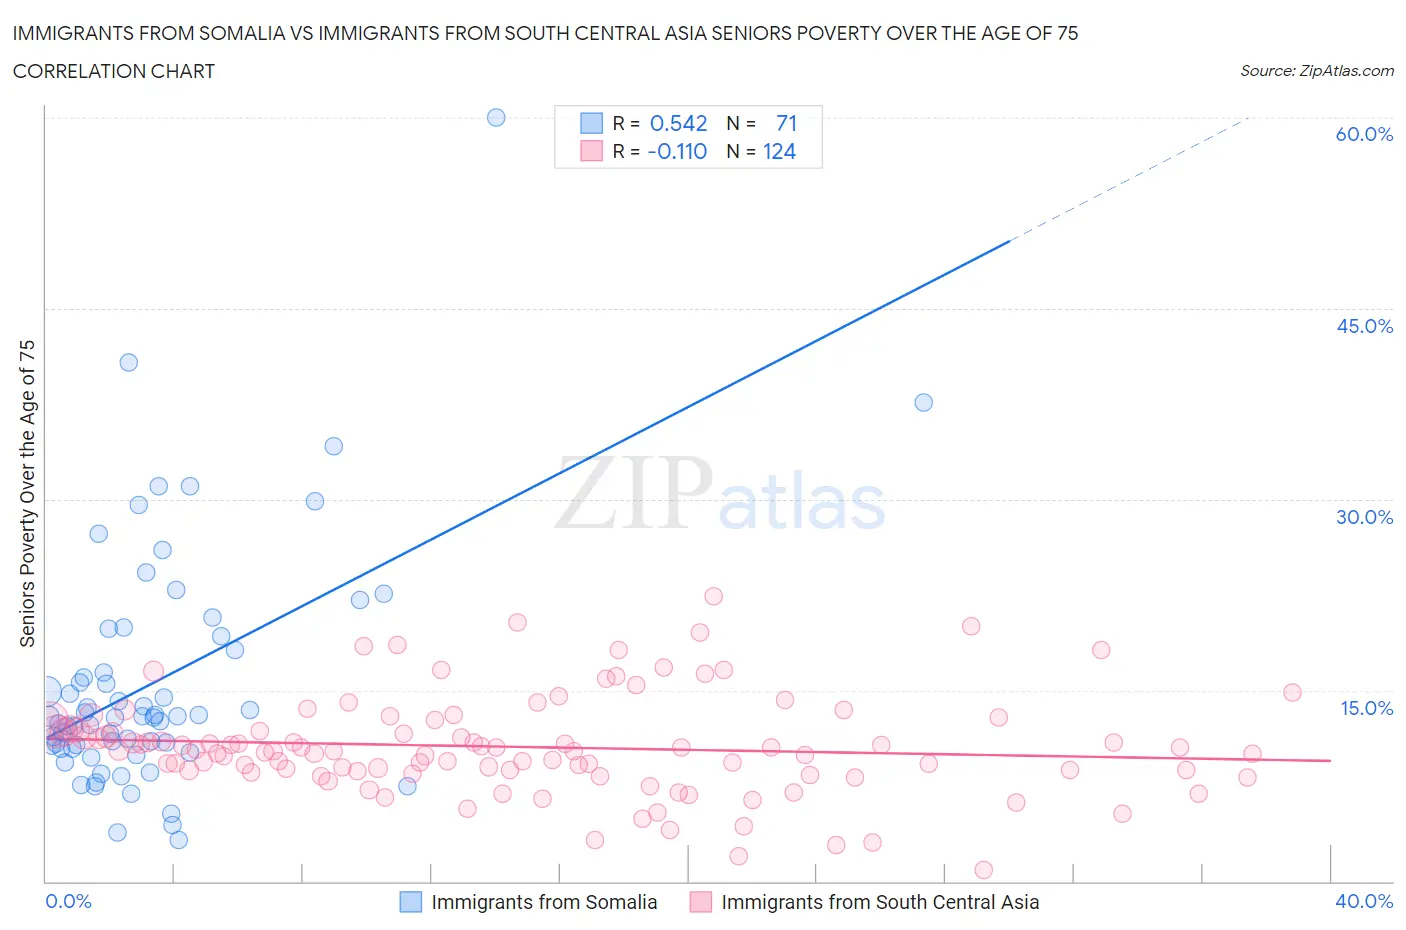 Immigrants from Somalia vs Immigrants from South Central Asia Seniors Poverty Over the Age of 75